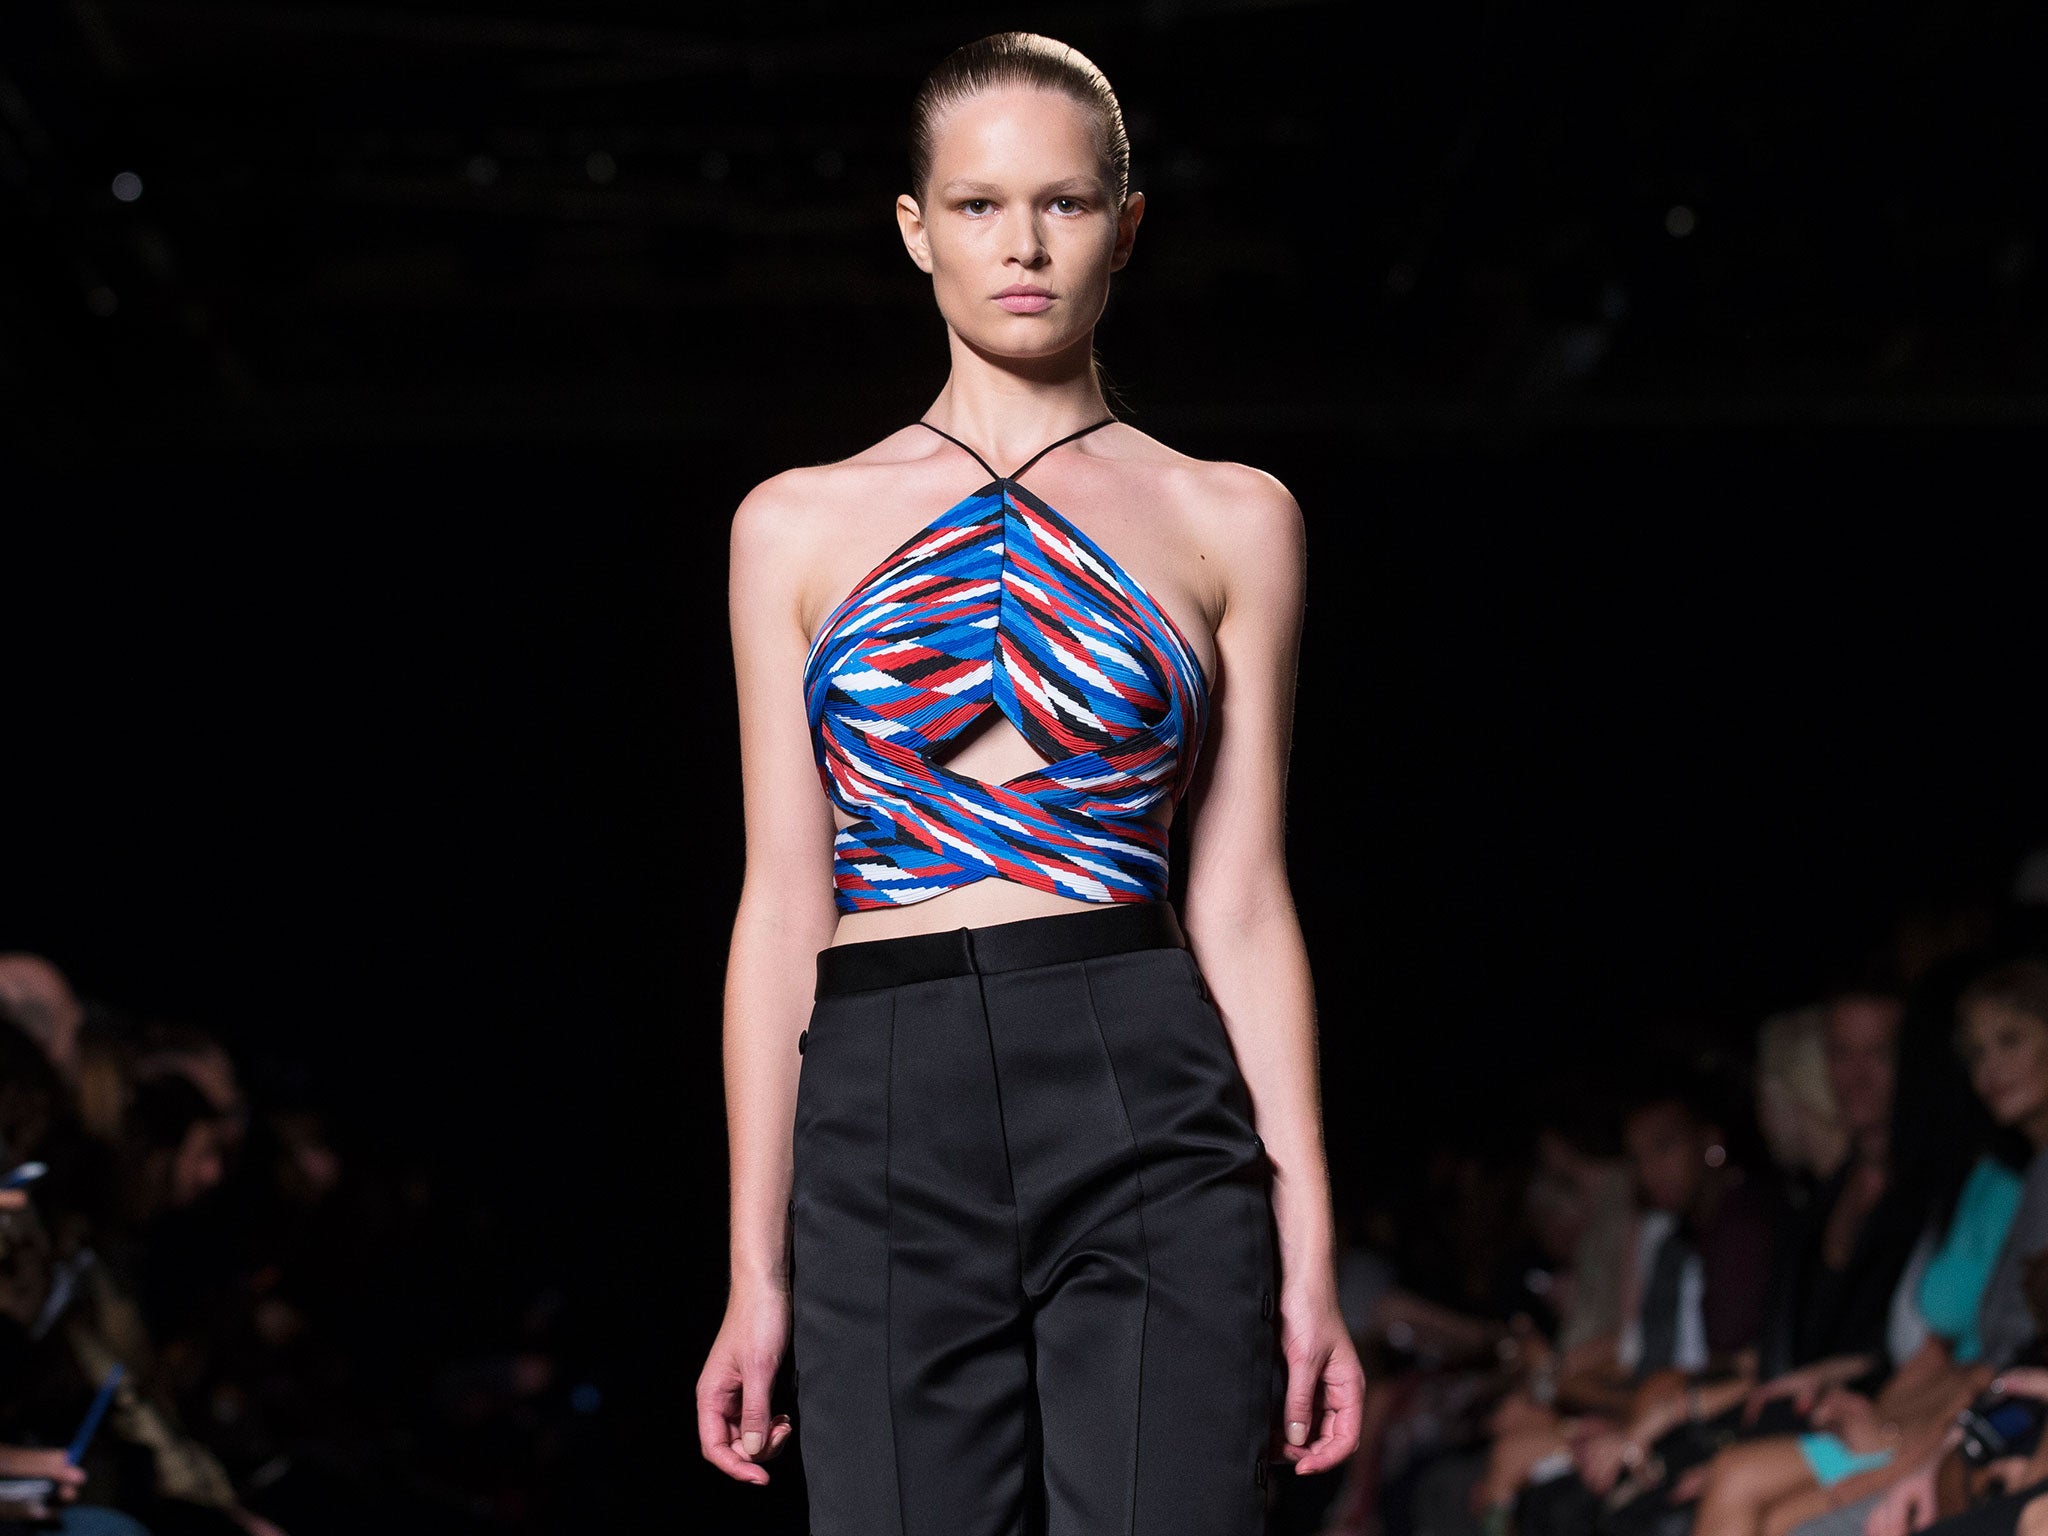 REVIEW: New York Fashion Week 2014 - Alexander Wang, The Independent